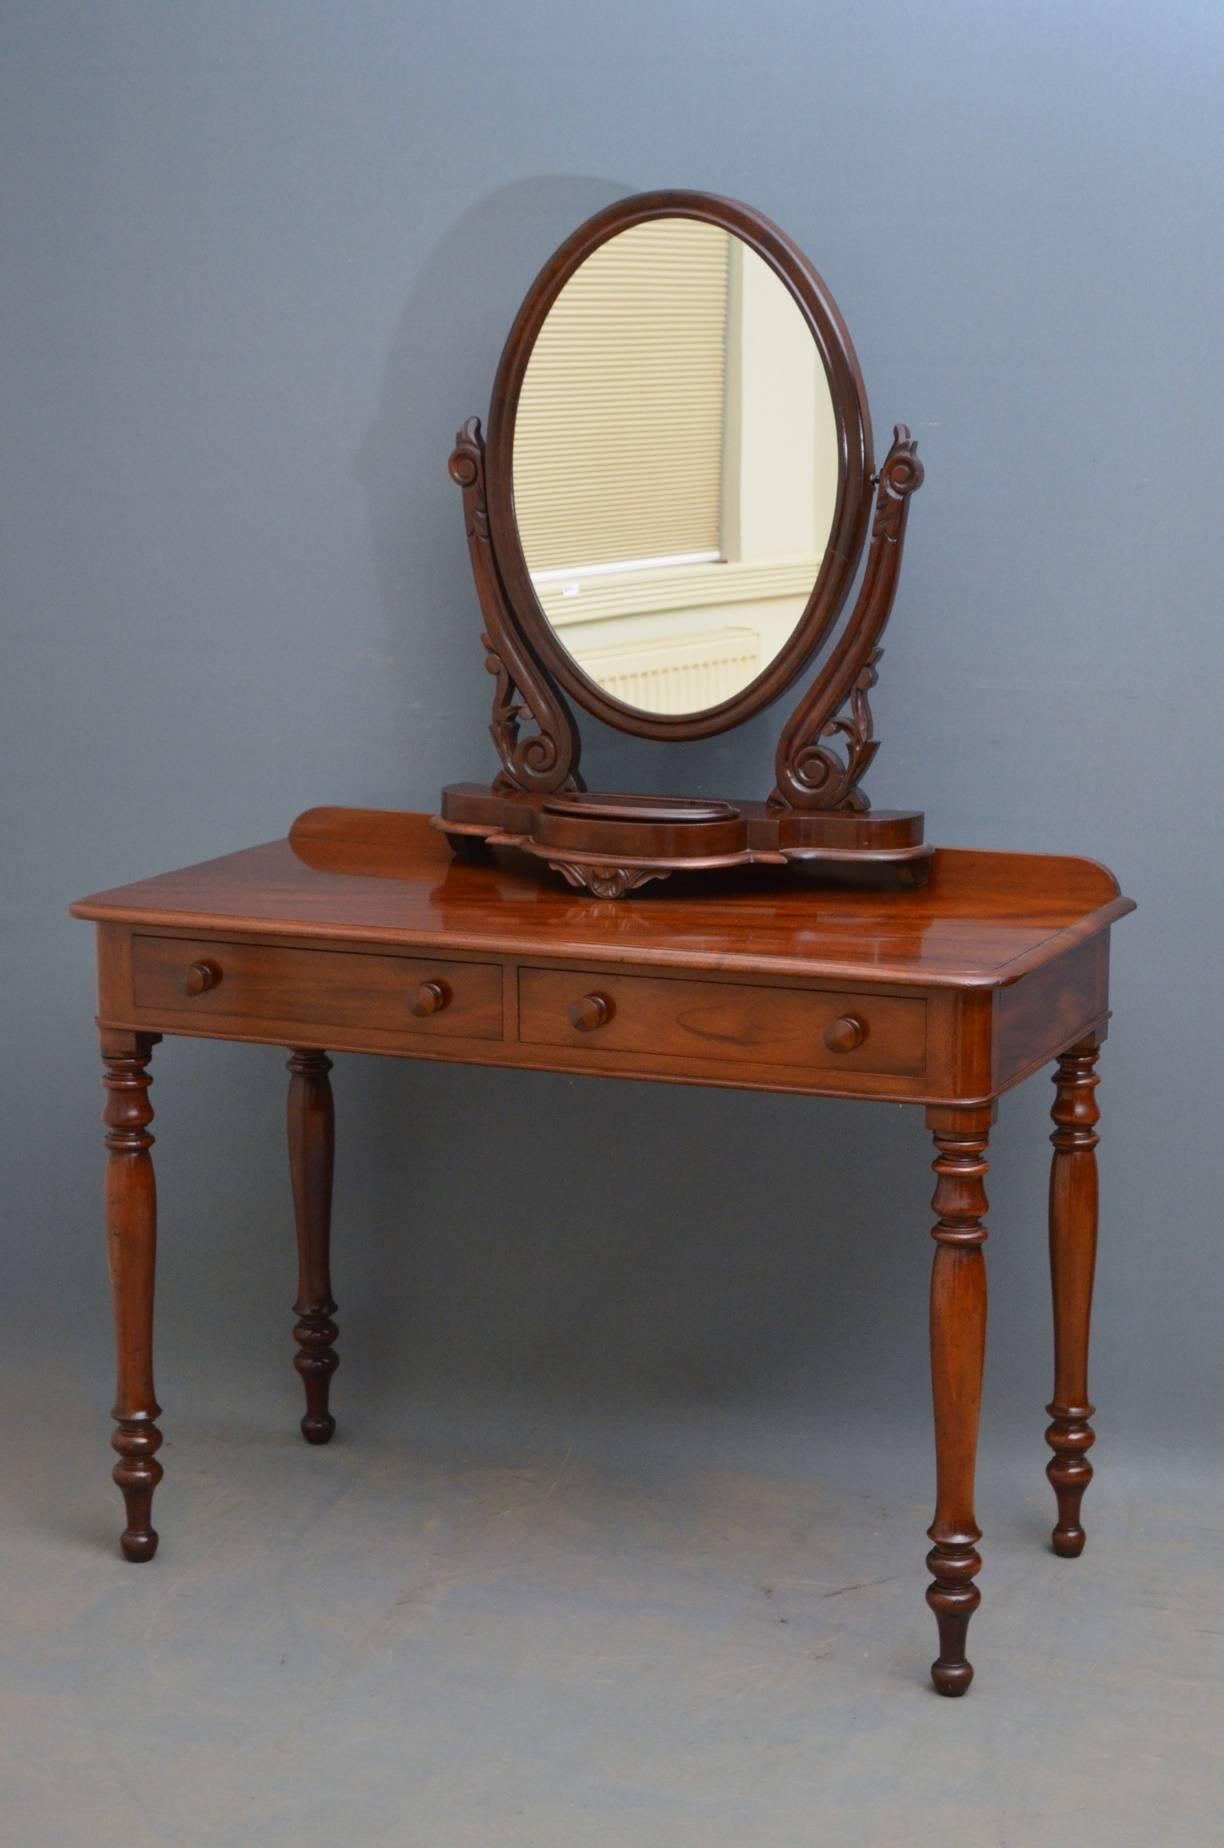 Sn3654 Victorian mahogany side table with up stand to back, figured mahogany moulded top and two frieze drawers fitted with original turned knobs, standing on turned legs. This Victorian table would make a good dressing or writing table. Mirror not